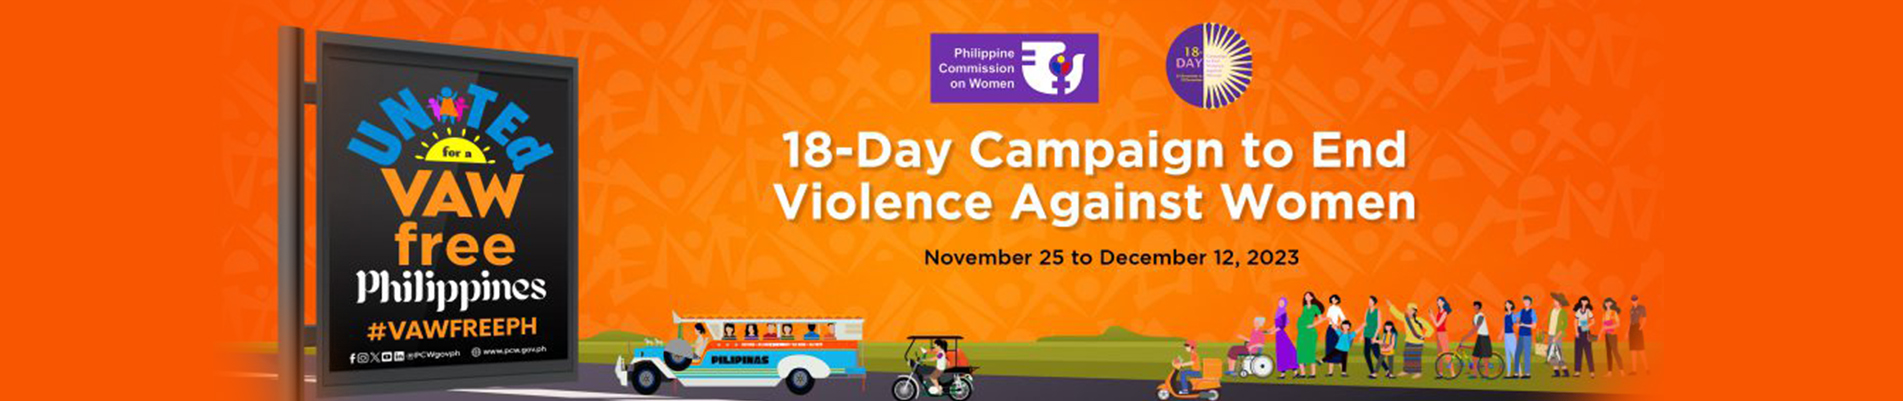 18-Day Campaign to End Violence Against Women